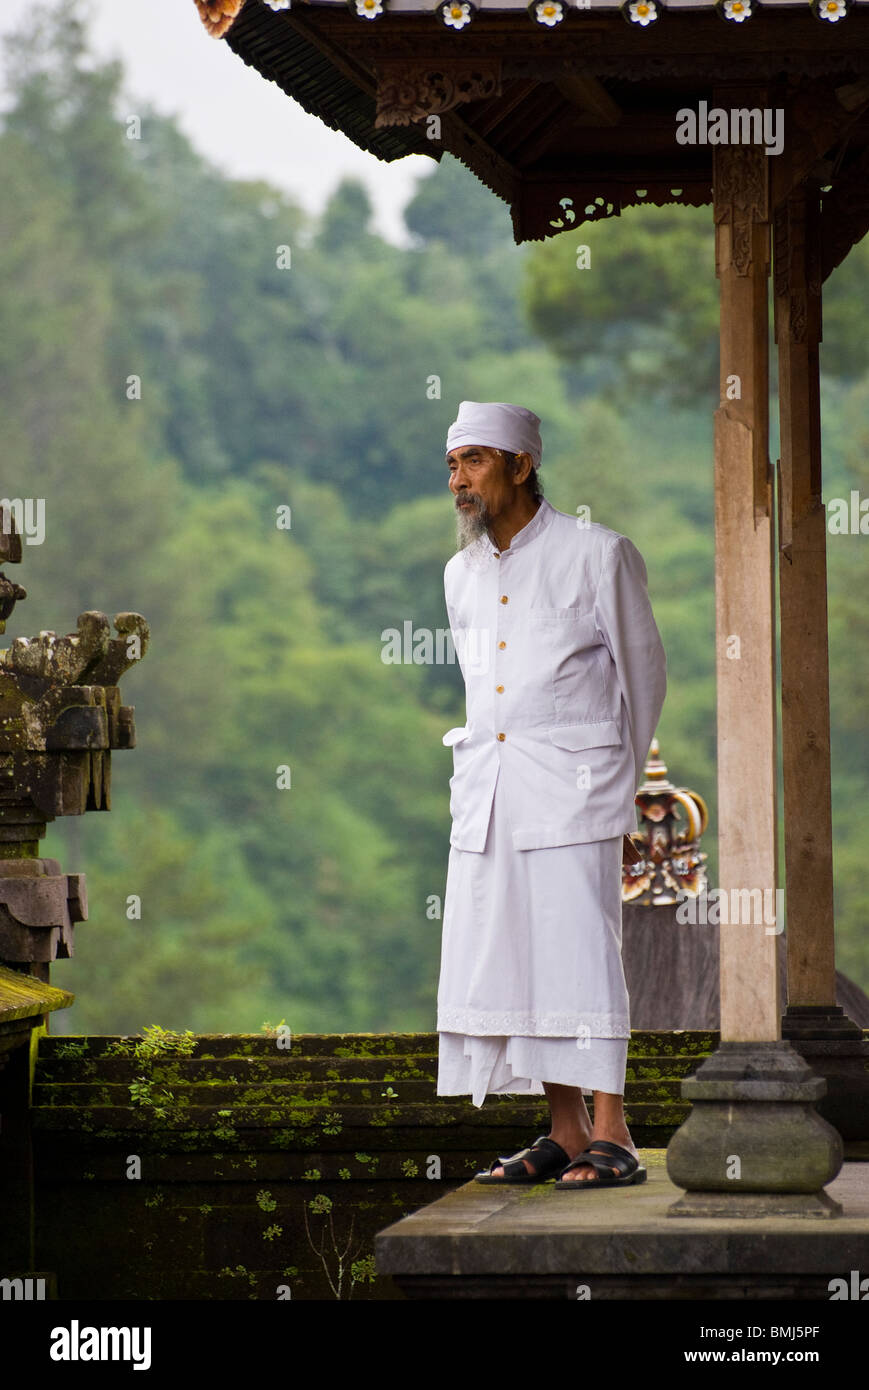 A holy man at Pura Besakih, the Mother Temple, in Bali, Indonesia. Besakih is the most important hindu temple in Bali. Stock Photo